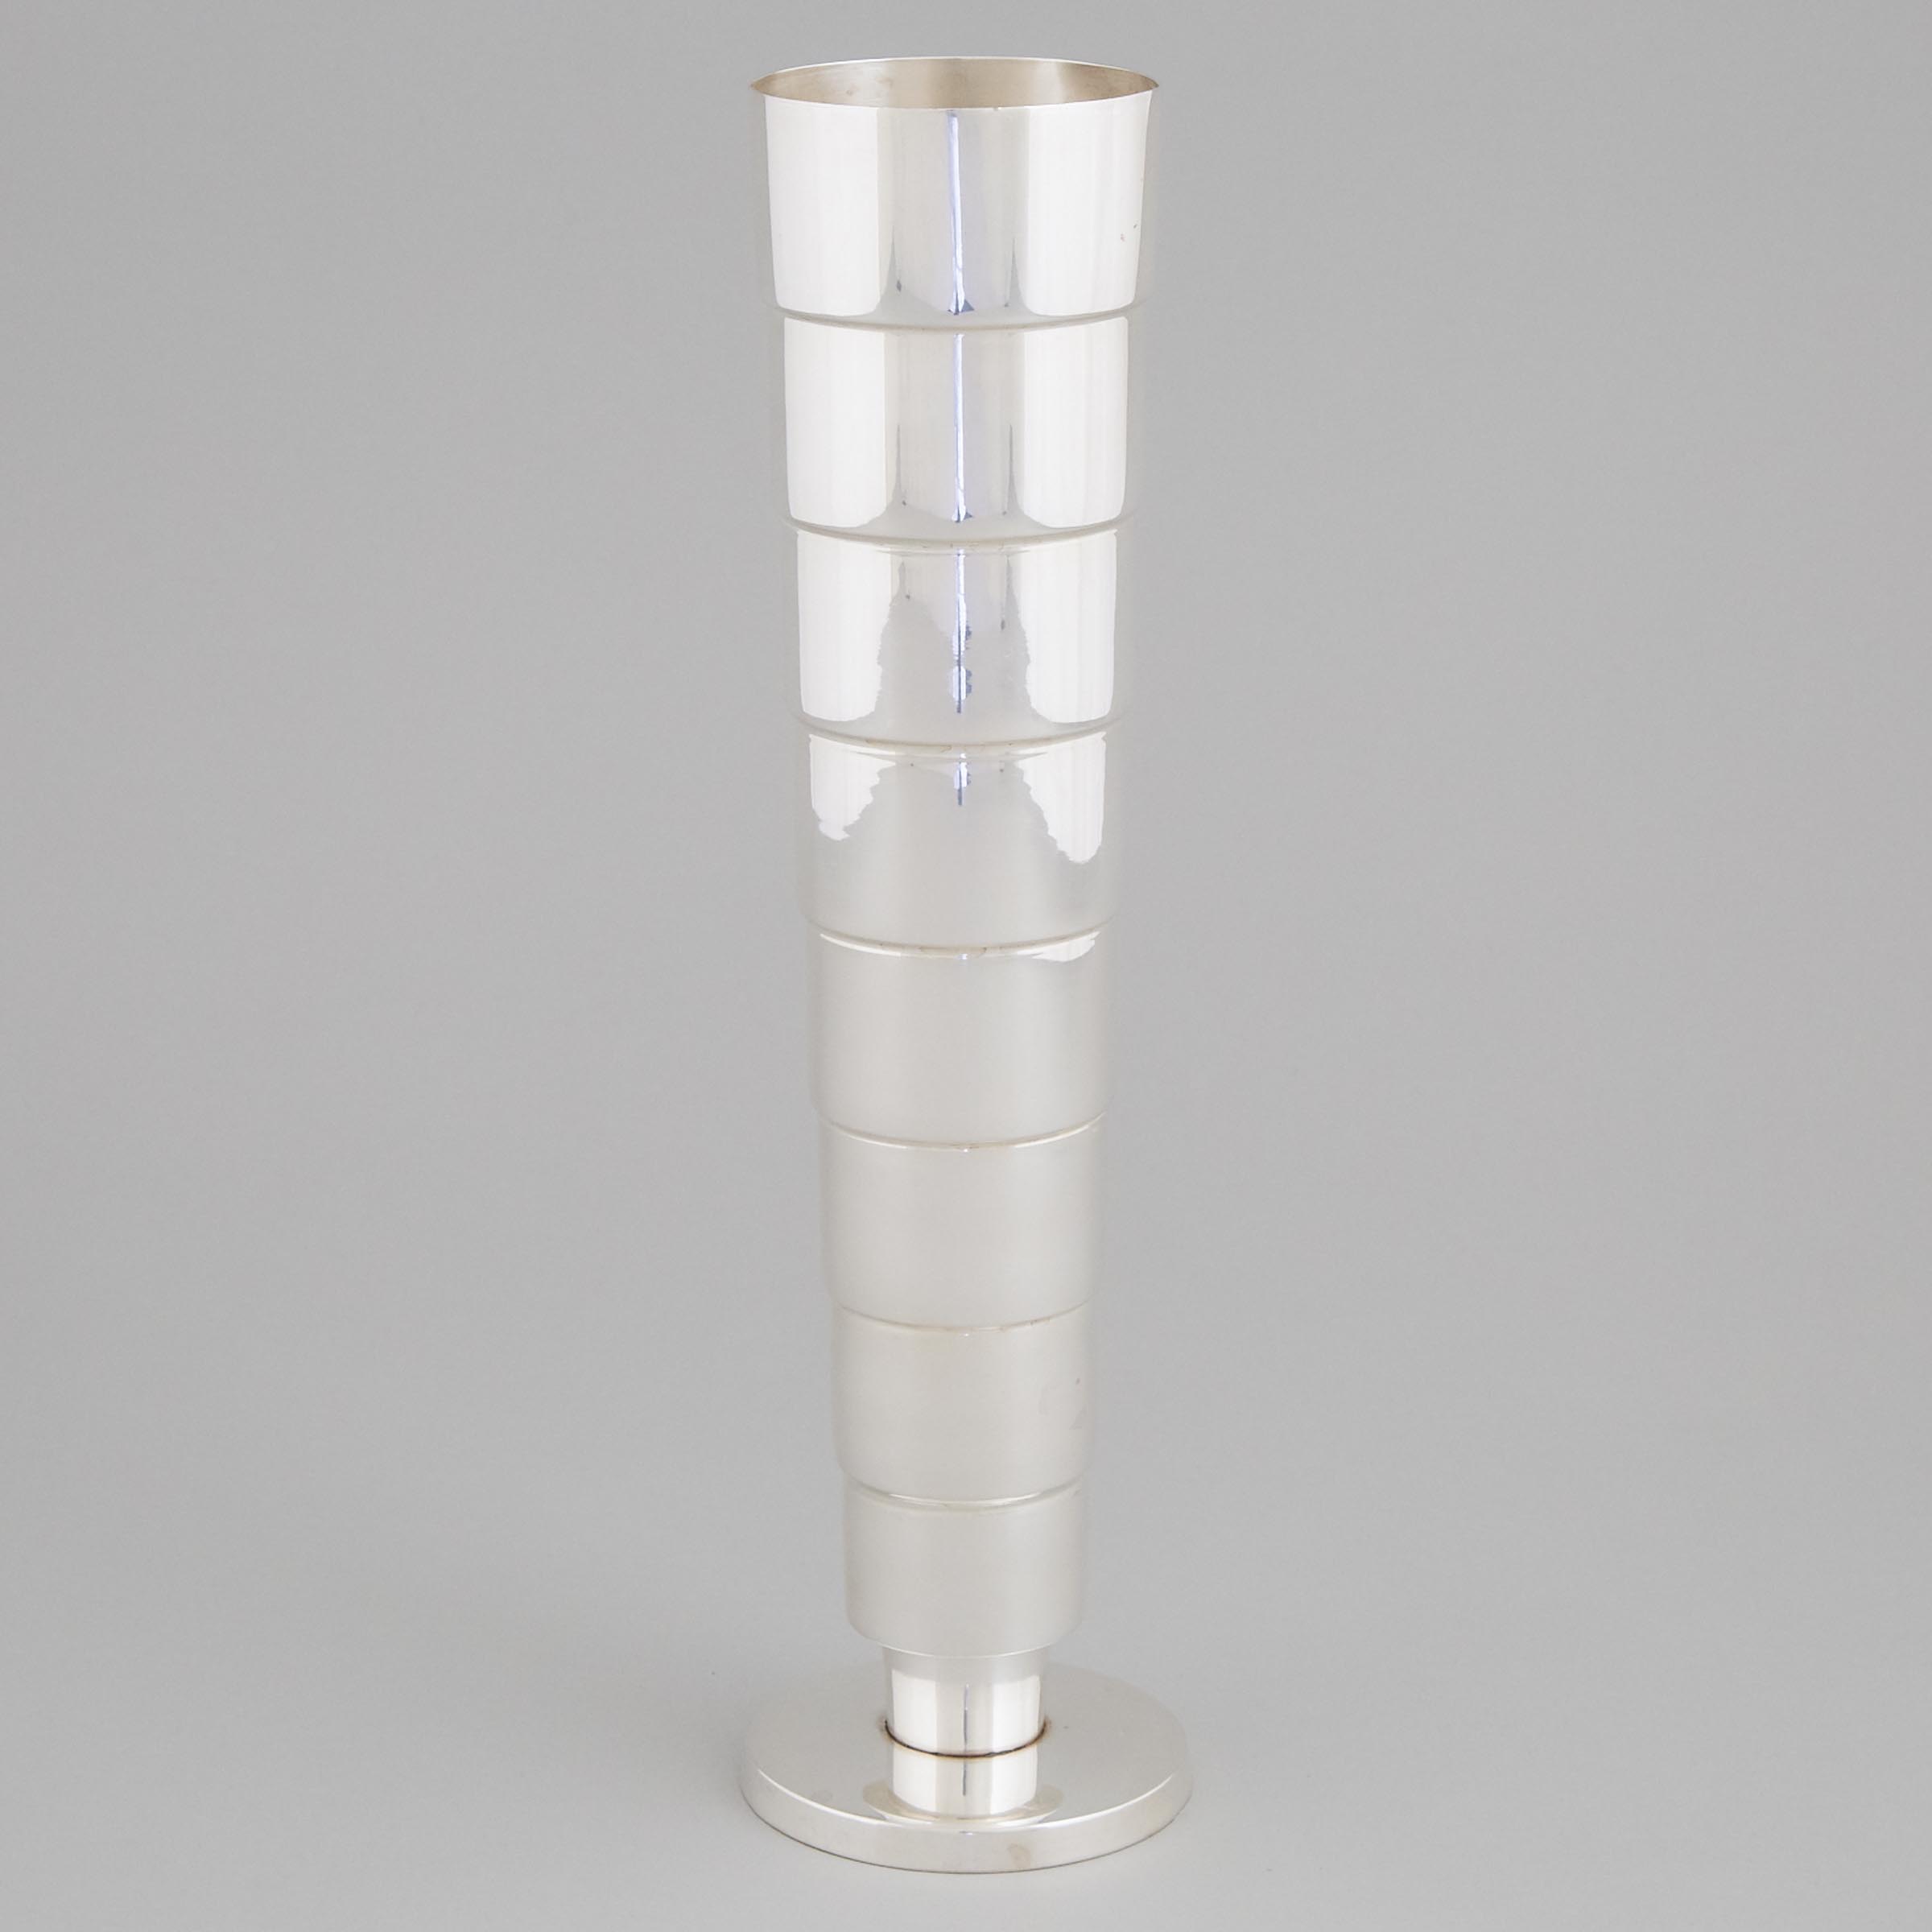 American Silver Plated 'Today' Vase, Kem Weber (designed 1927), late 20th century